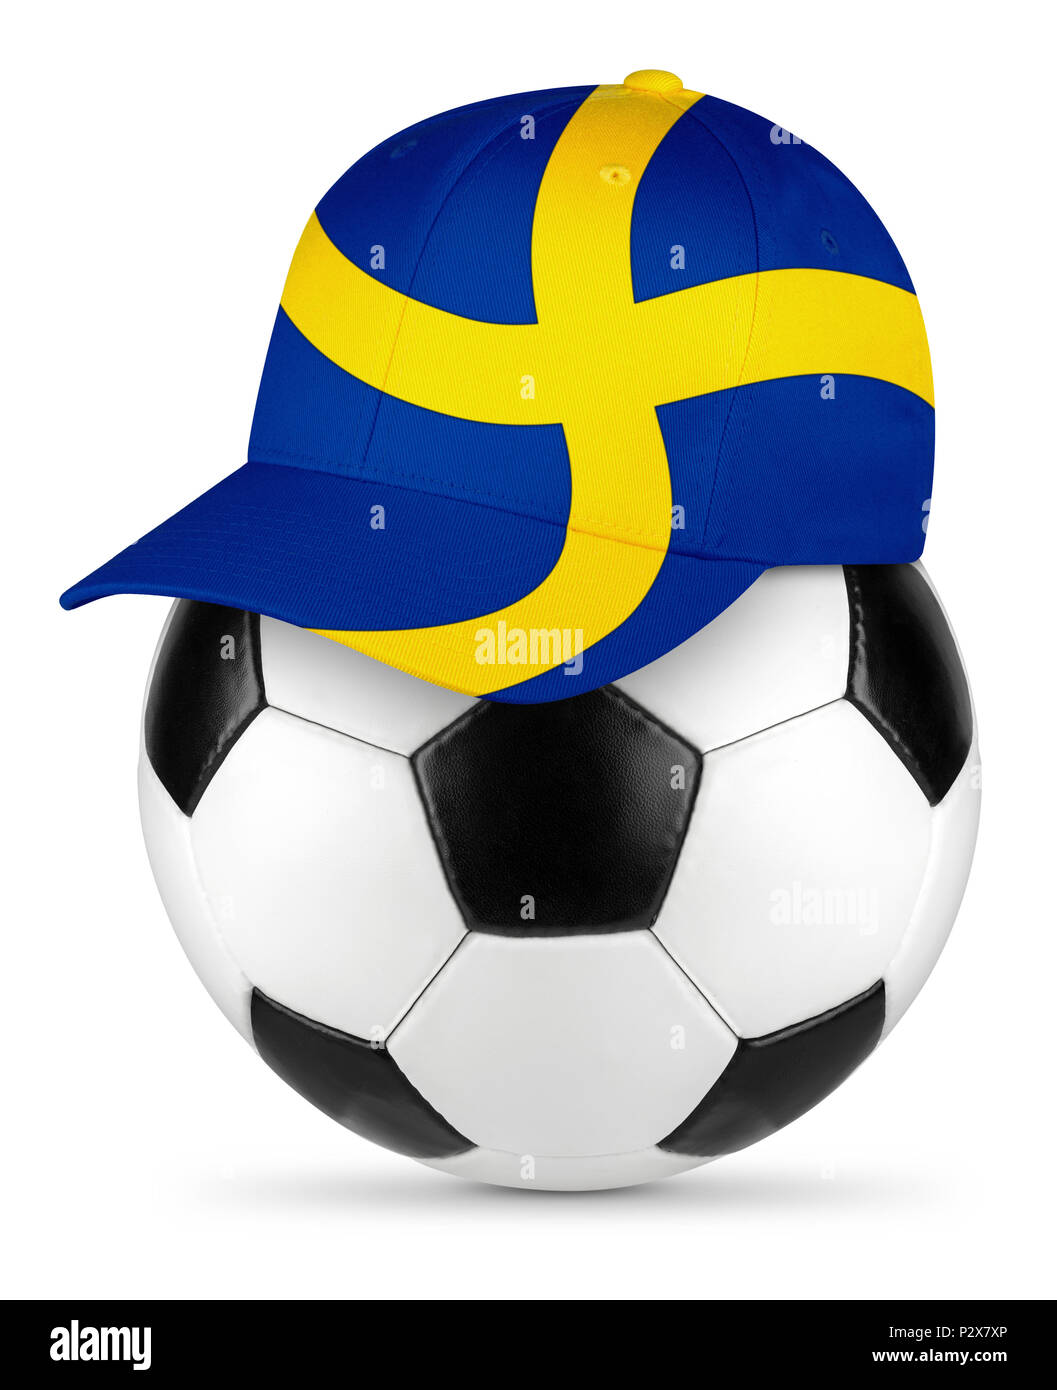 Classic black white leather soccer ball with sweden swedish flag baseball fan cap isolated background sport football concept Stock Photo